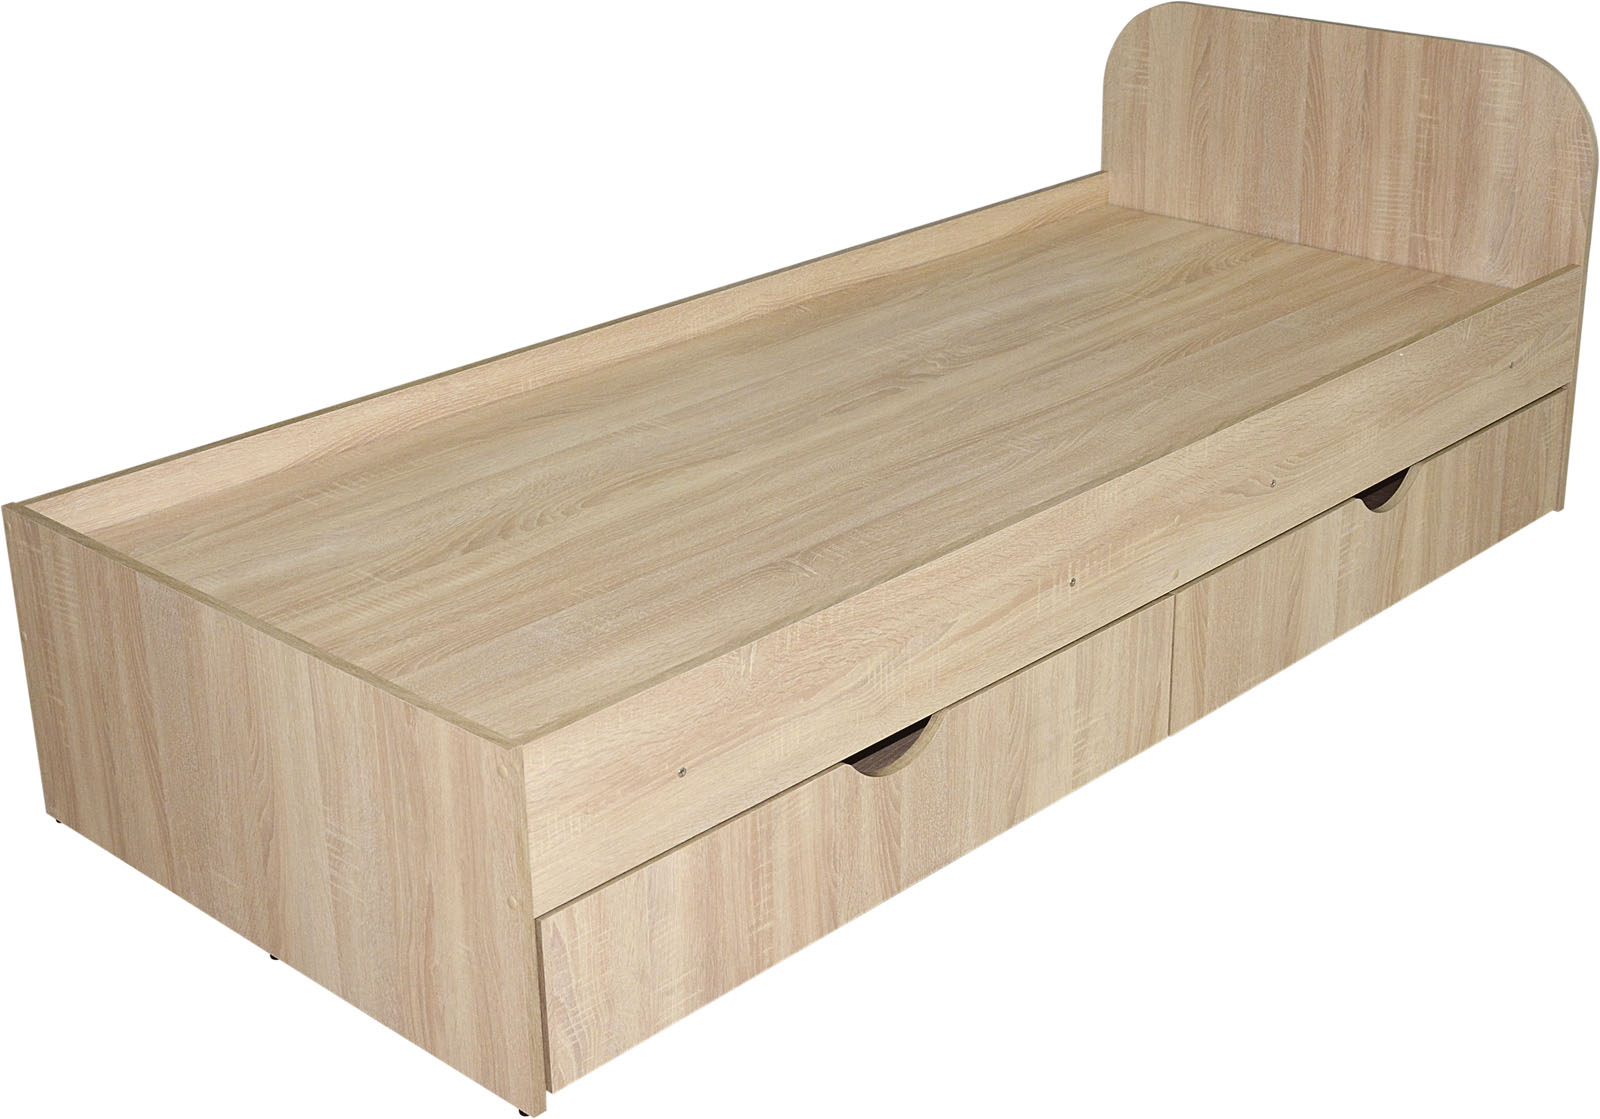 Sonya bed 1 with drawers